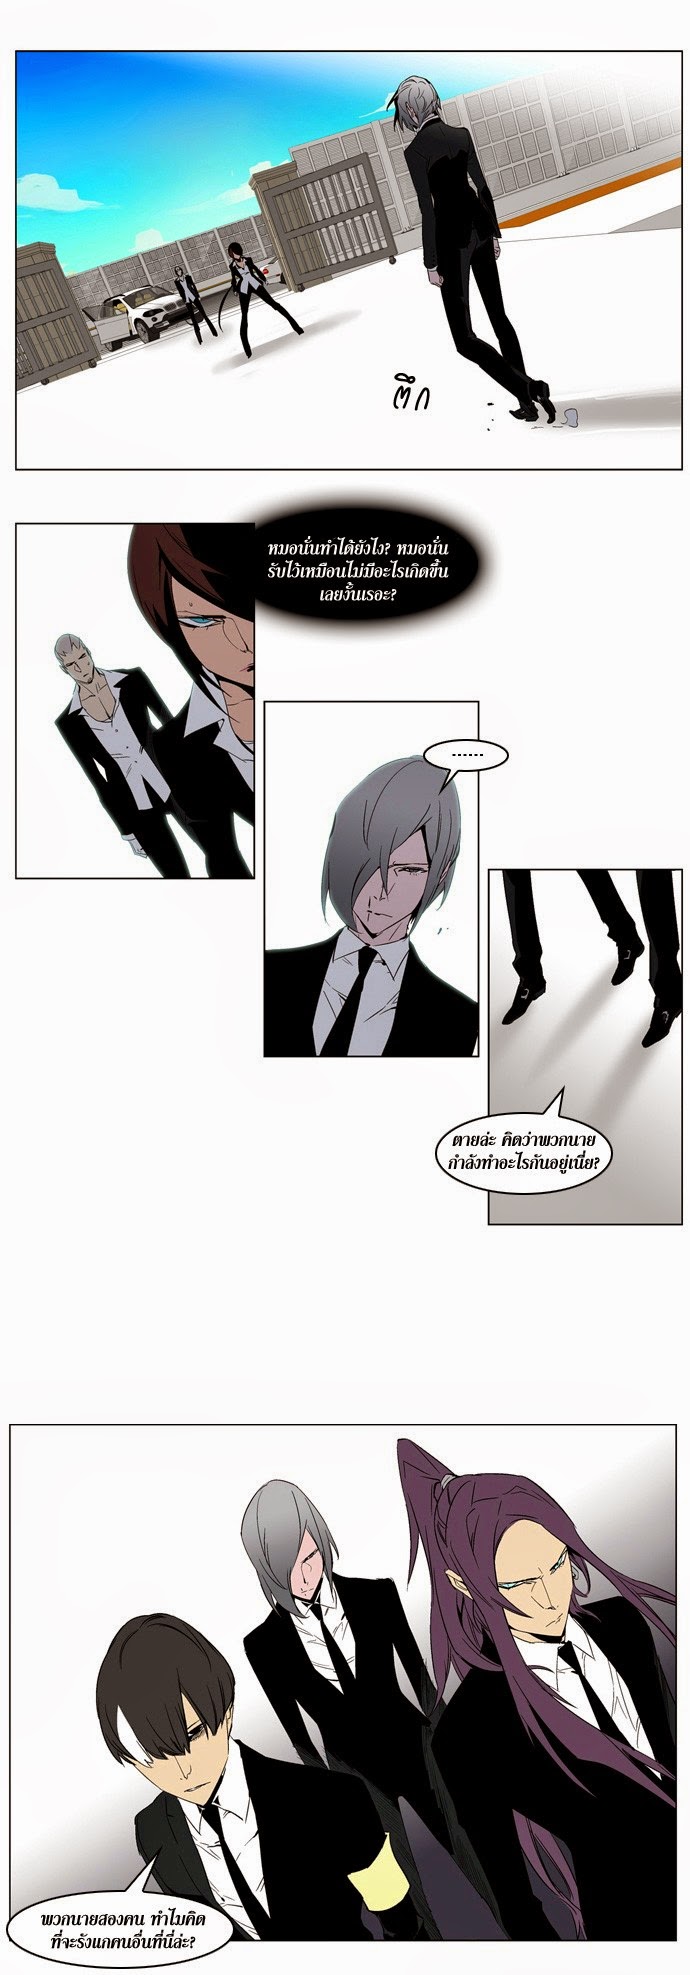 Noblesse 213 014